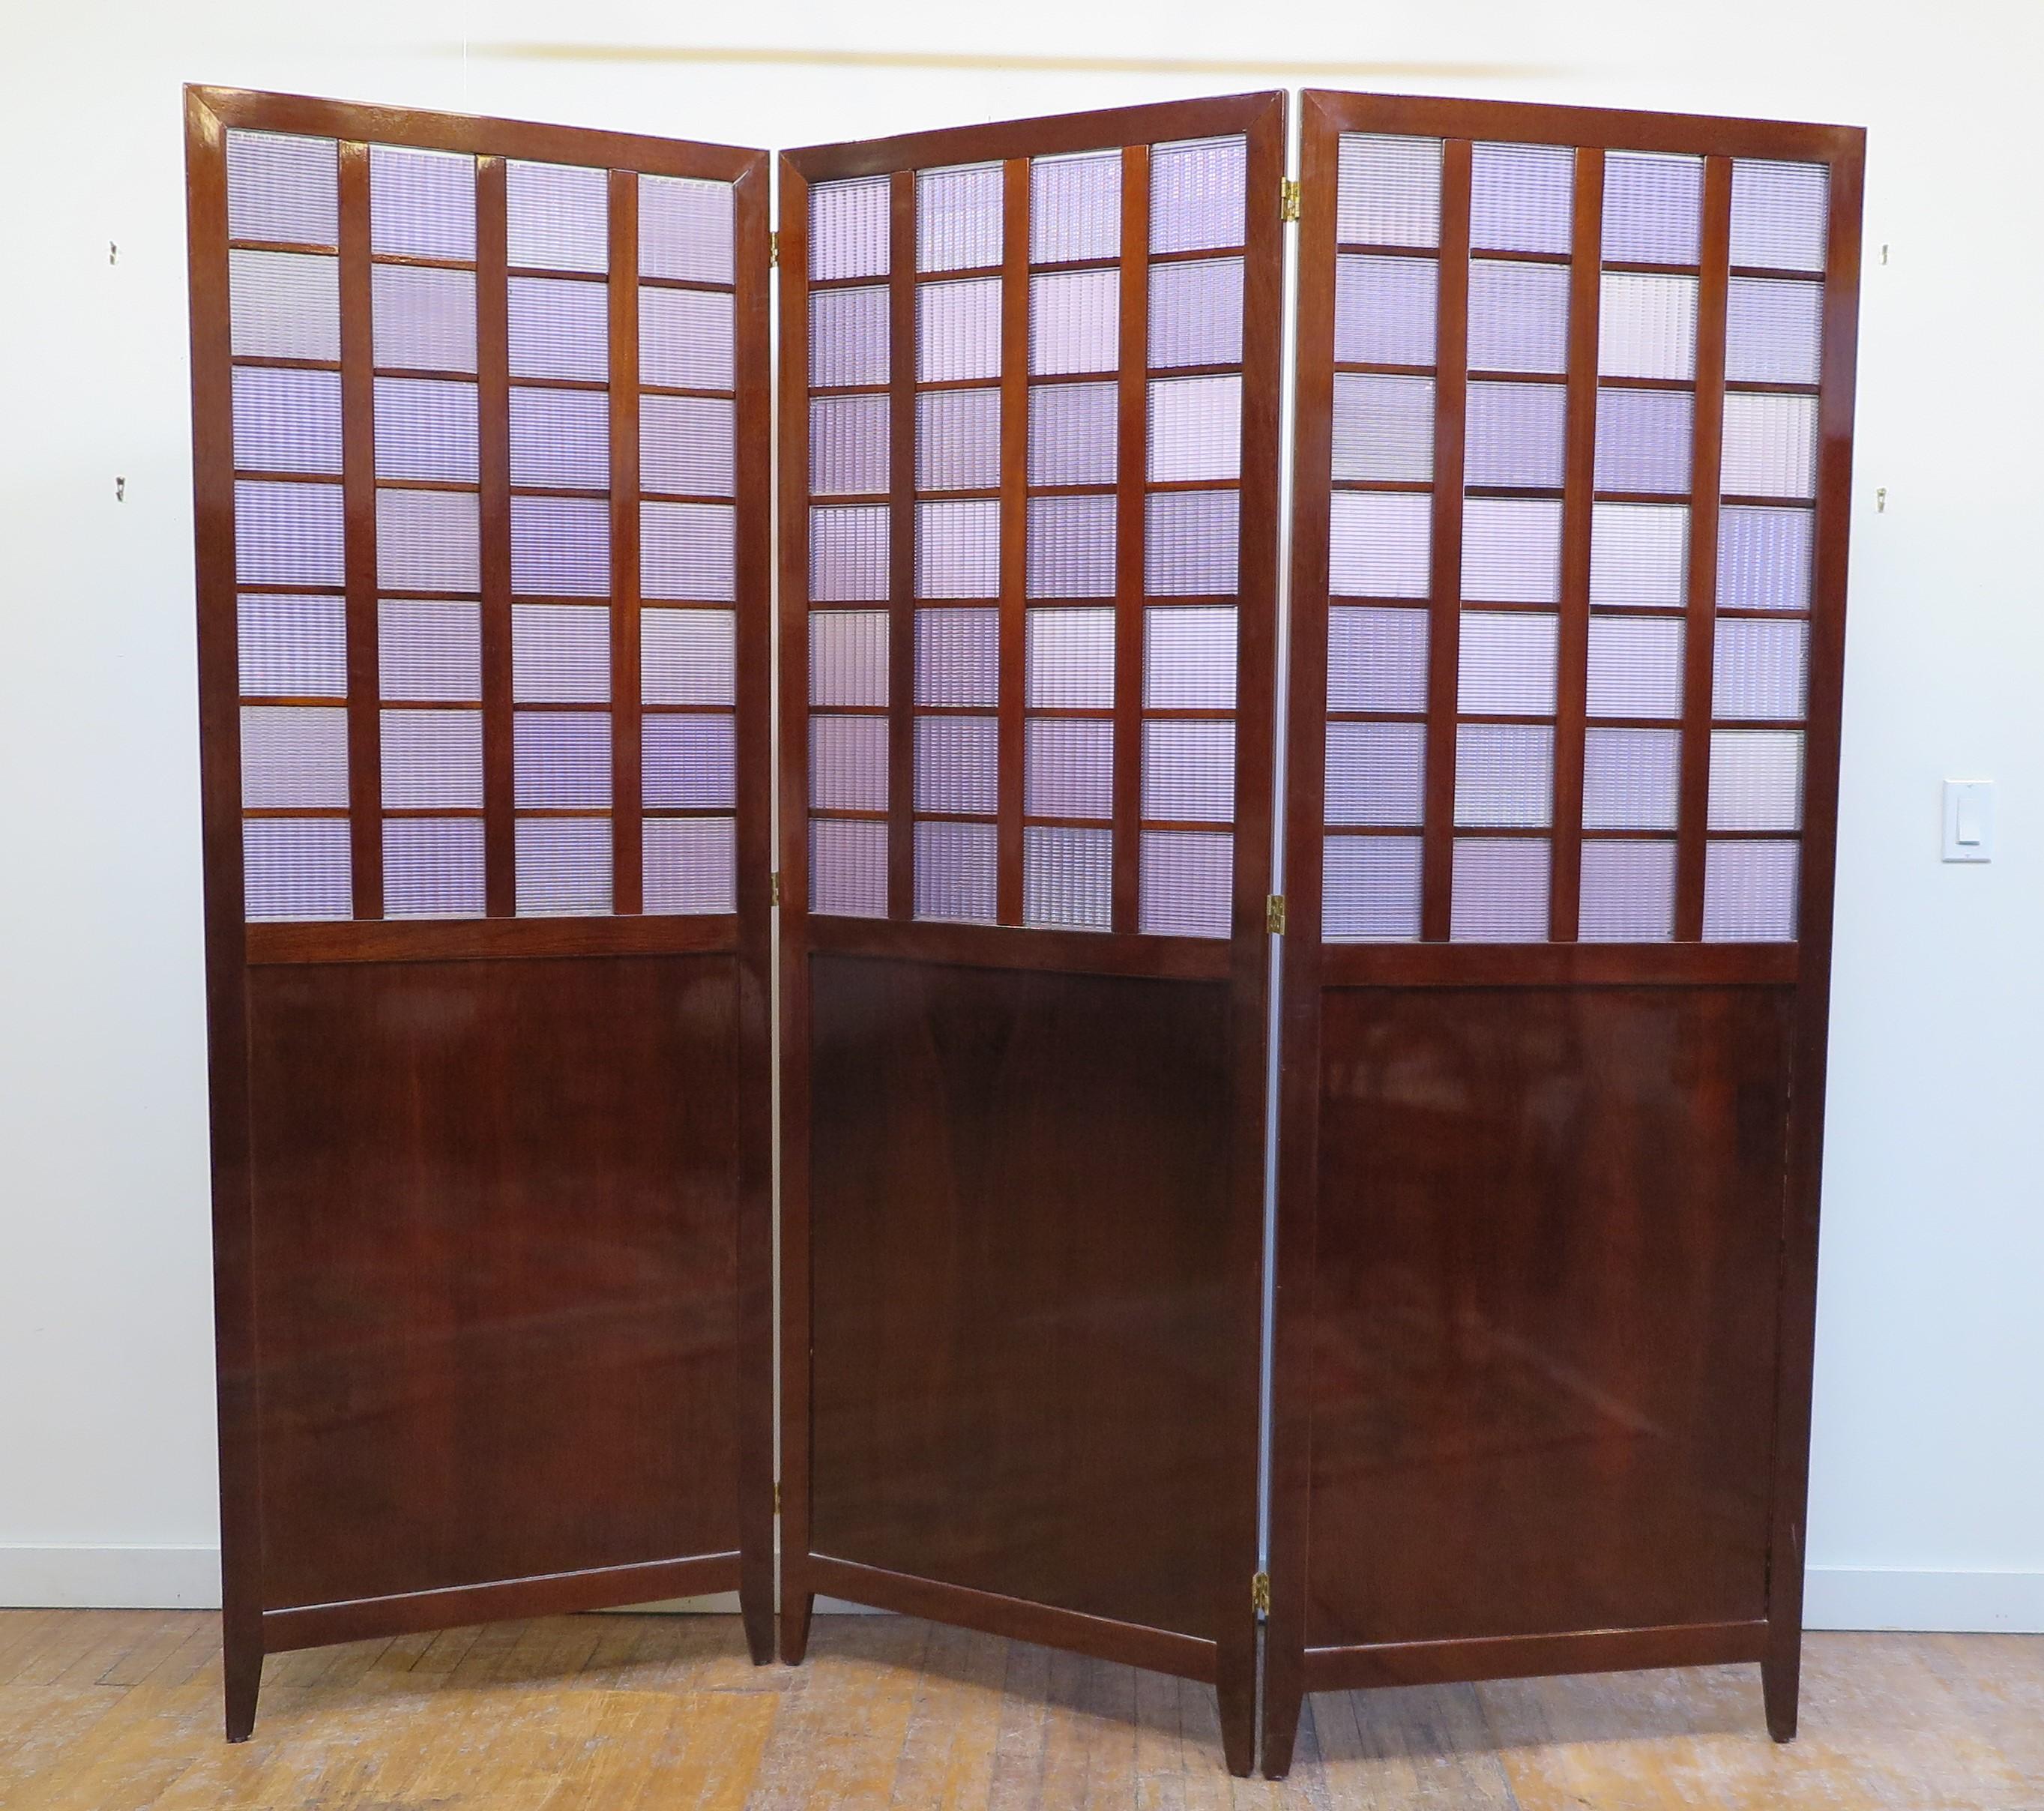 Bendheim Glass panel room divider privacy folding screen. Mahogany panels with colored molded glass set in squares creating a geometric design. Bendheim press molded glass squares having a Lilac colored tint acescent three mahogany wooden panels on